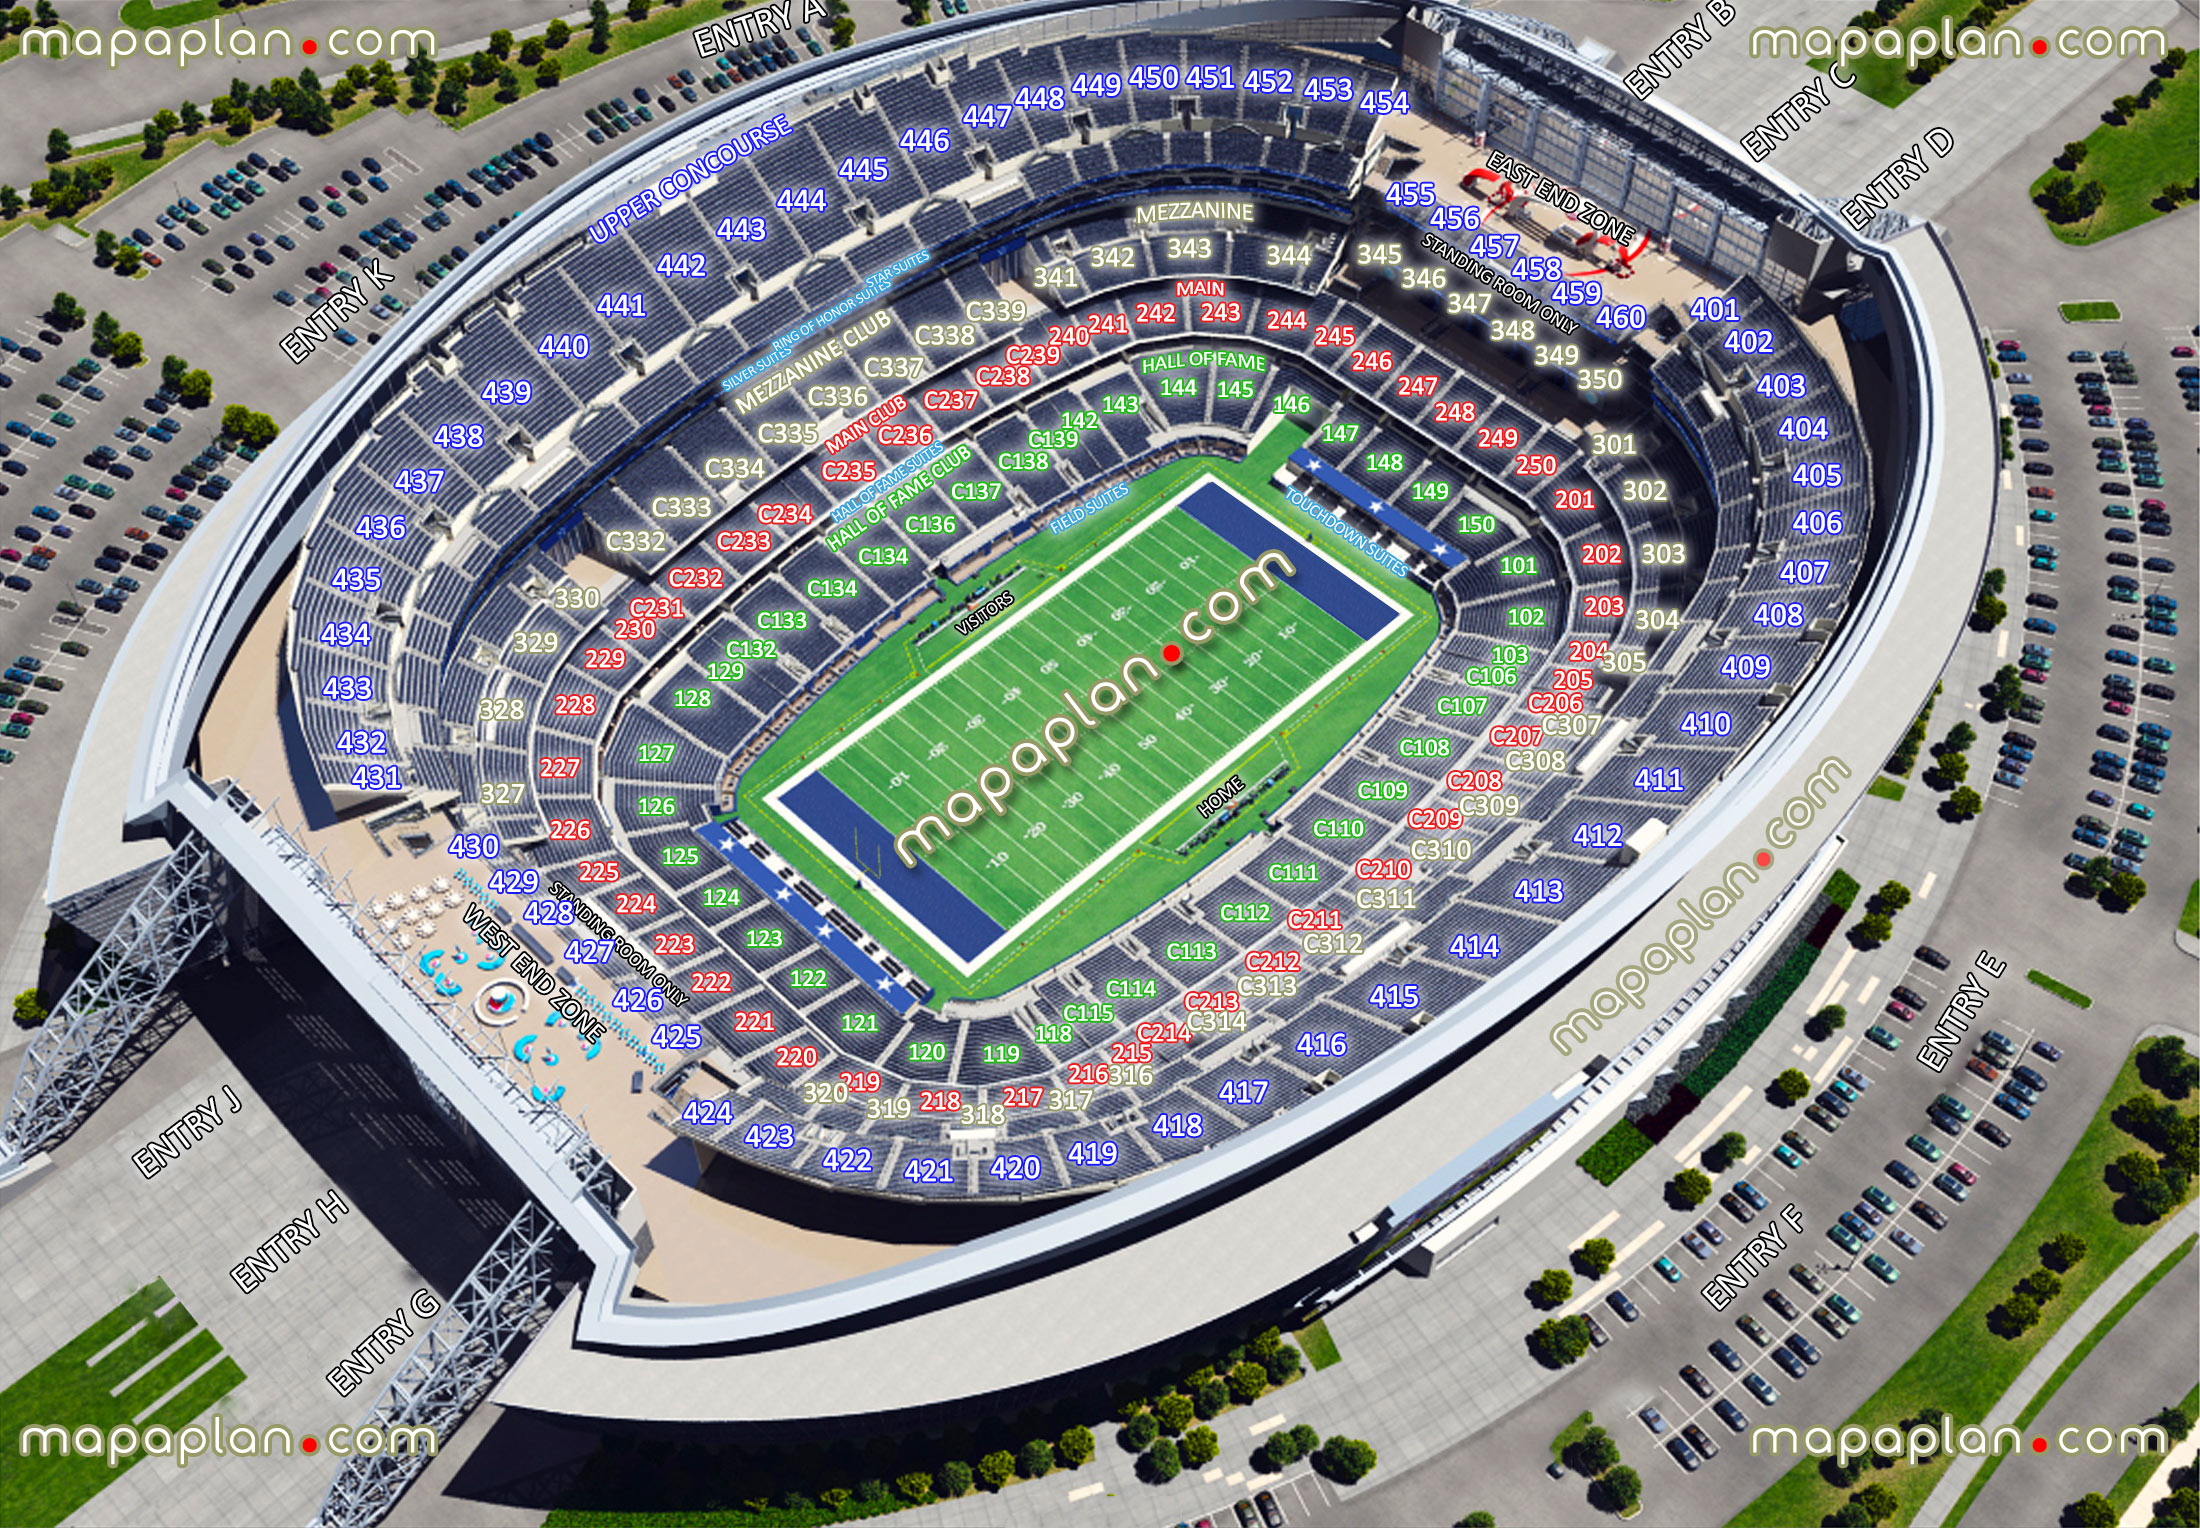 football seating chart virtual view dallas cowboys 3d interior arrangement interactive viewer photo review inside capacity guide hall fame main mezzanine upper concourse sections suites map including touchdown field silver ring honor star levels Dallas Cowboys AT&T Stadium seating chart